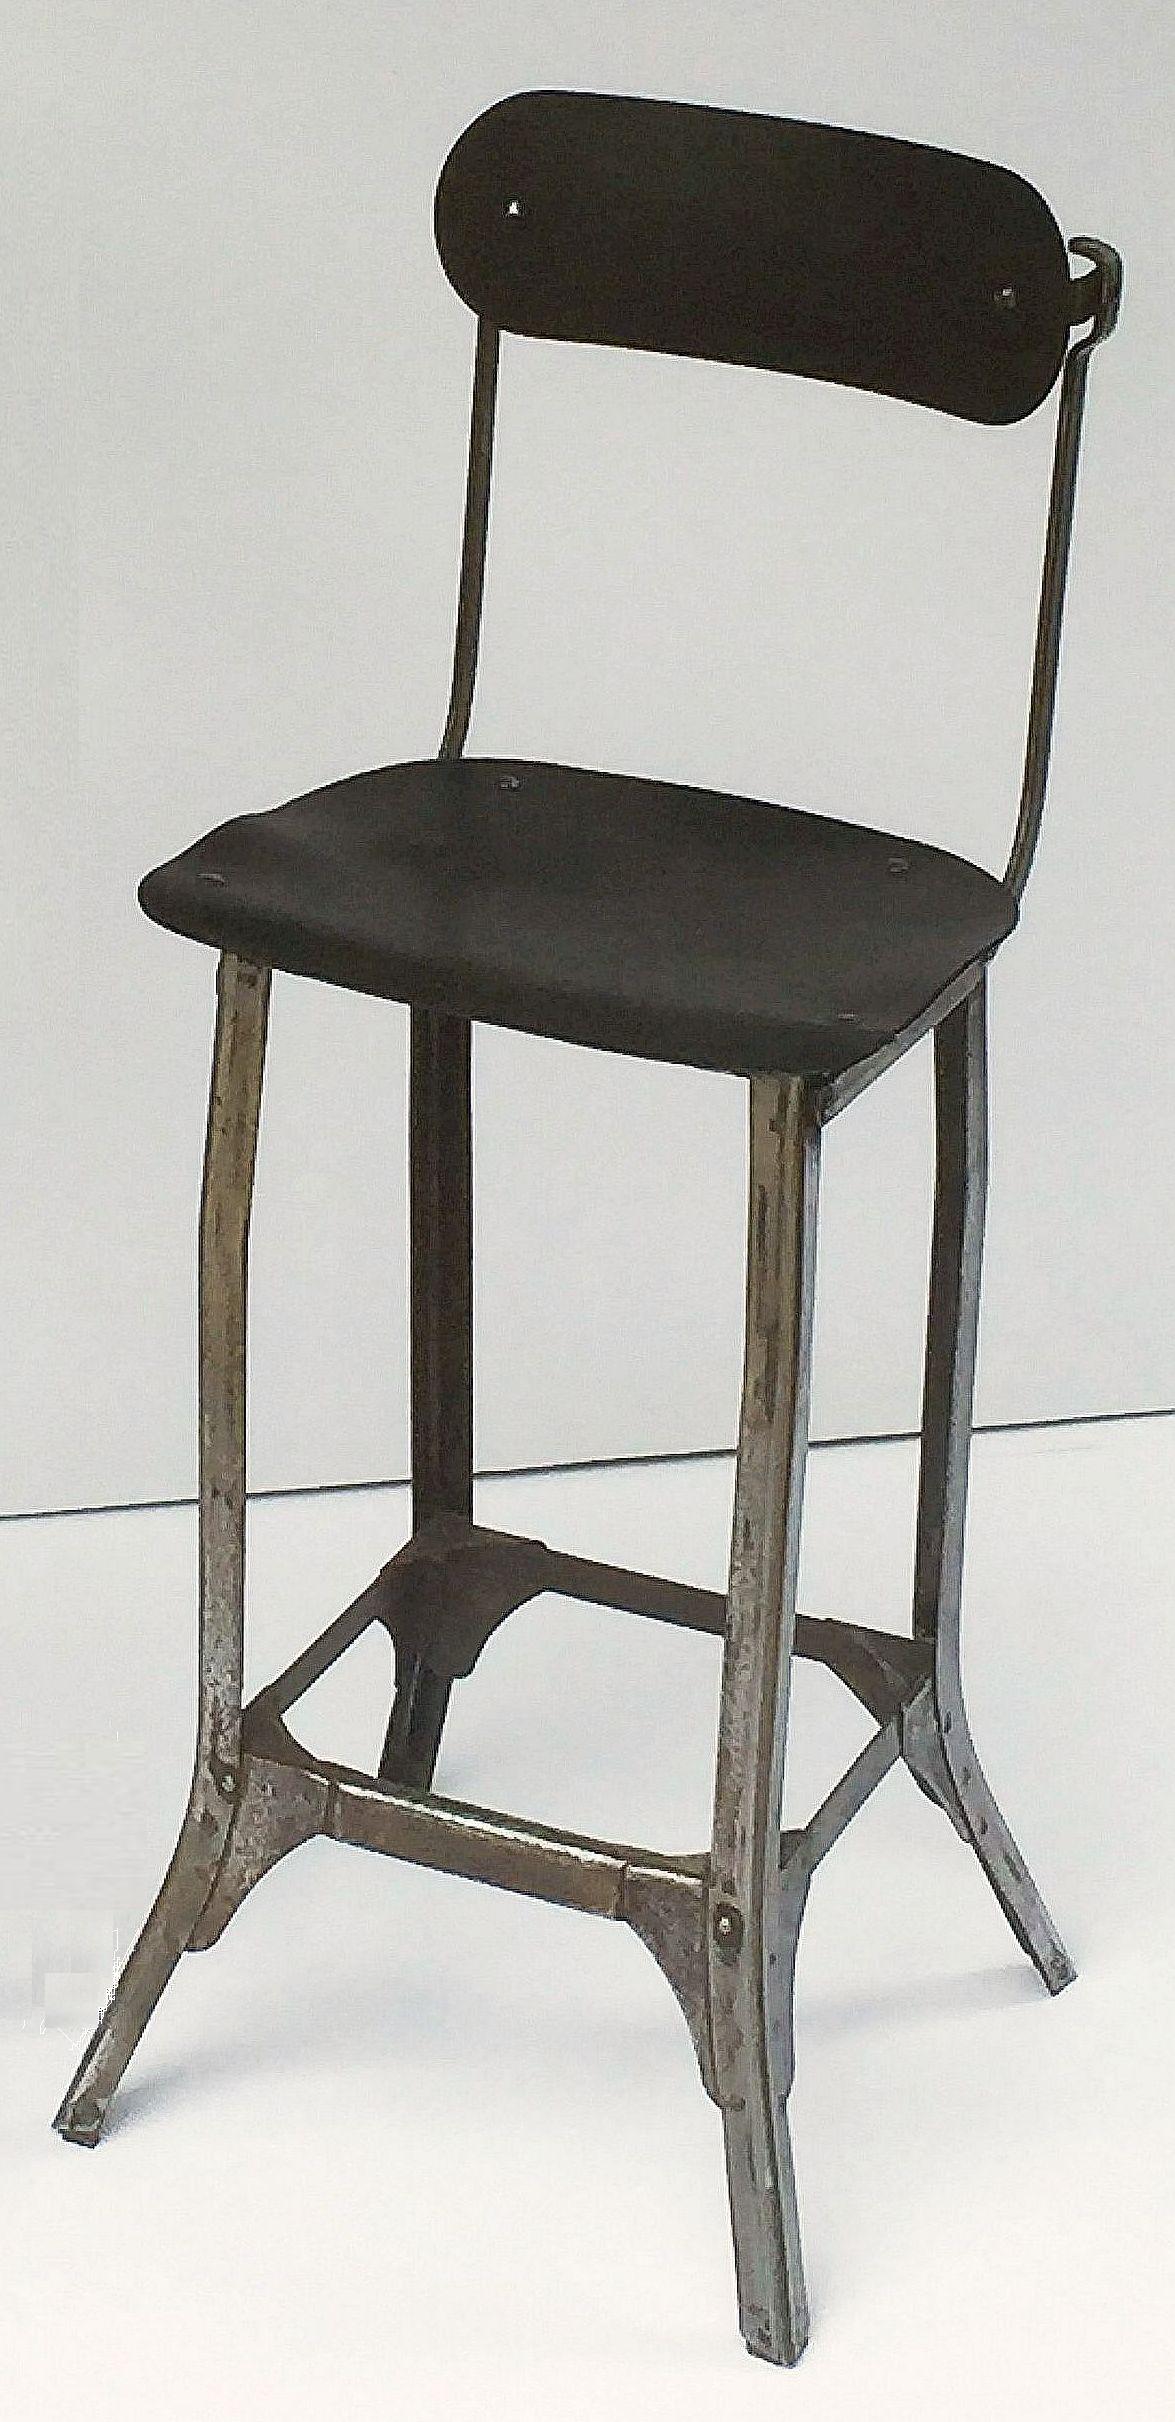 A fine English silversmith's chair, c.1920, from Sheffield, city site of a flourishing silver-smith trade and British Assay office location.
This industrial high chair features a composite seat and back on a brushed steel frame, the back capable of